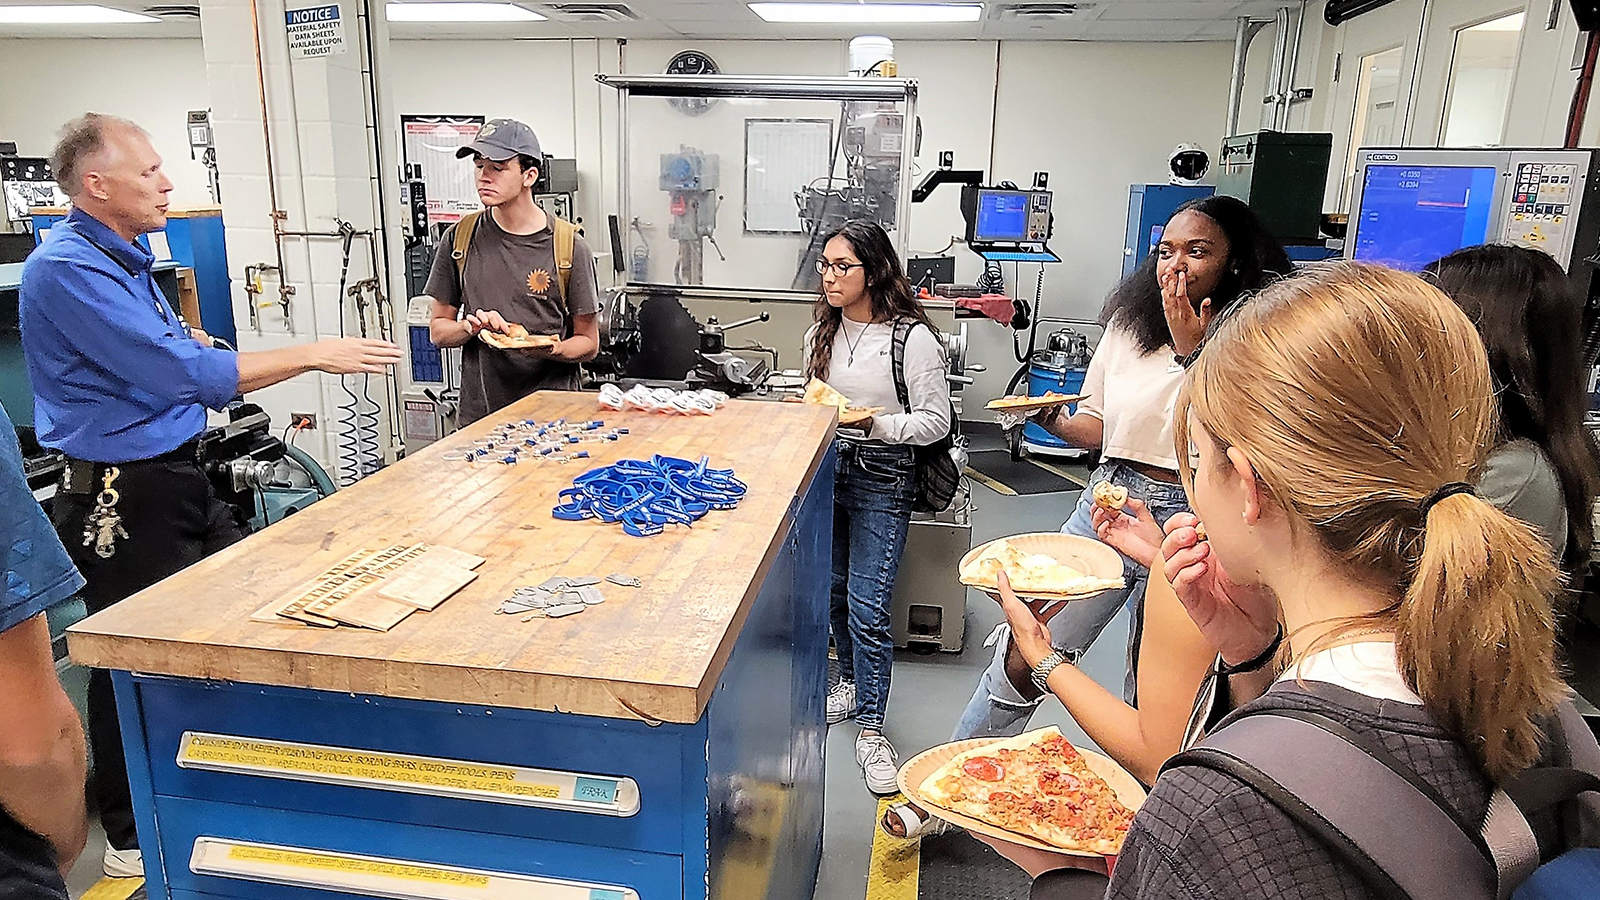 a group of people in a room with machines and tables with pizza